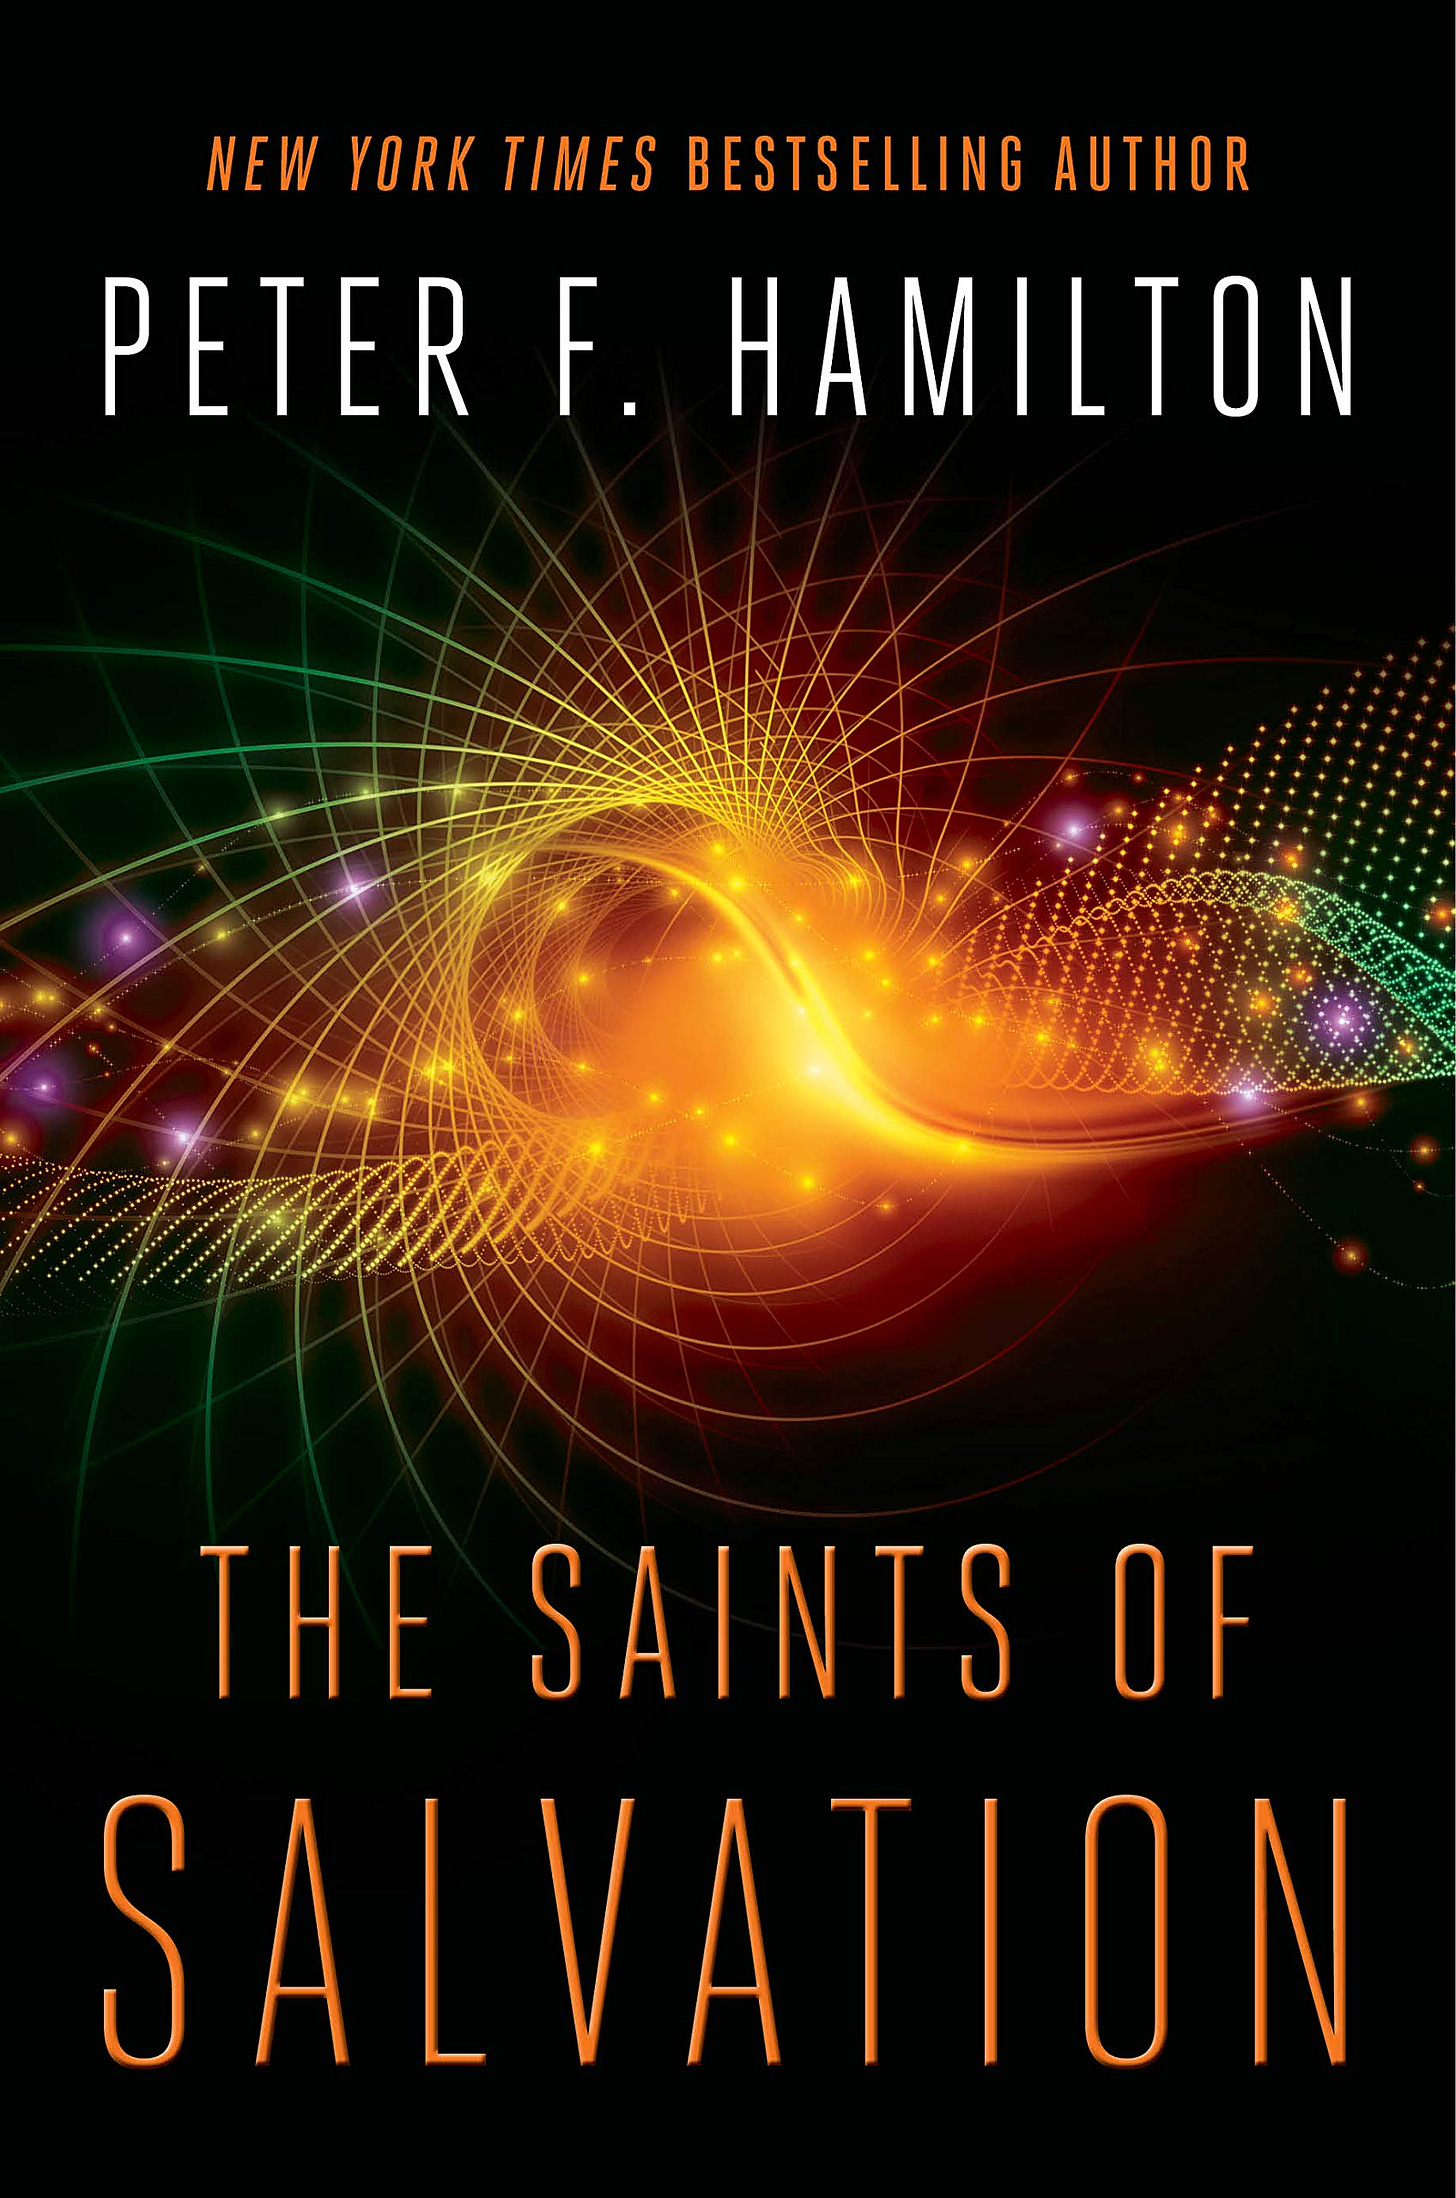 Book cover of Peter F. Hamilton's Saints of Salvation, which features an orange geometric shape against a black background. 